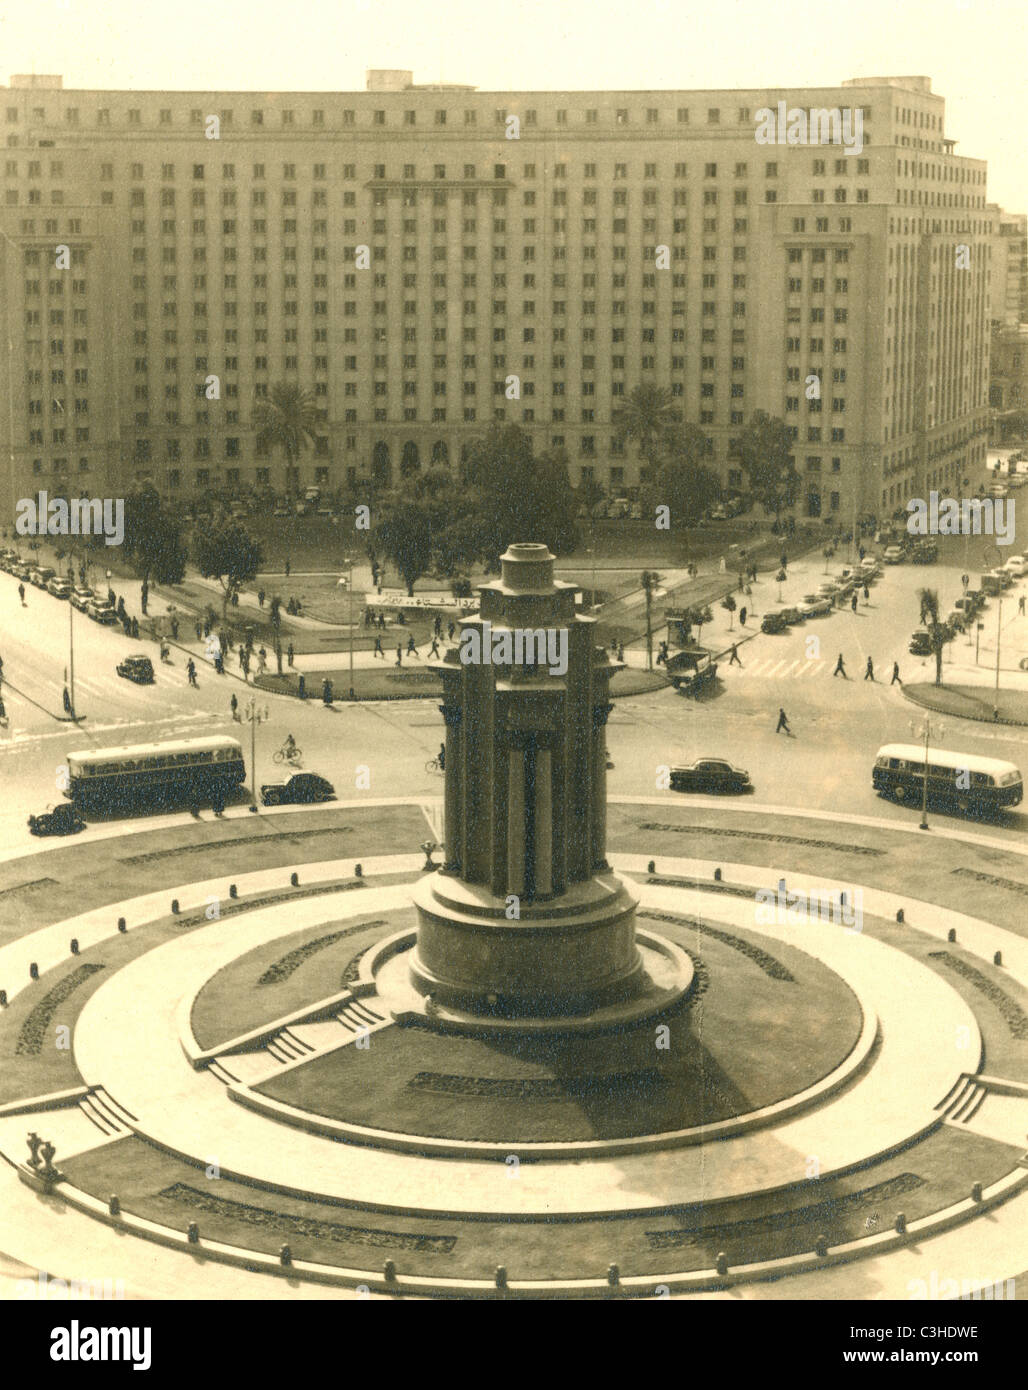 Tahrir Square 1955, previously Ismailia Square renamed Midan Tahrir or Liberation Square after the Revolution of 1919. Stock Photo